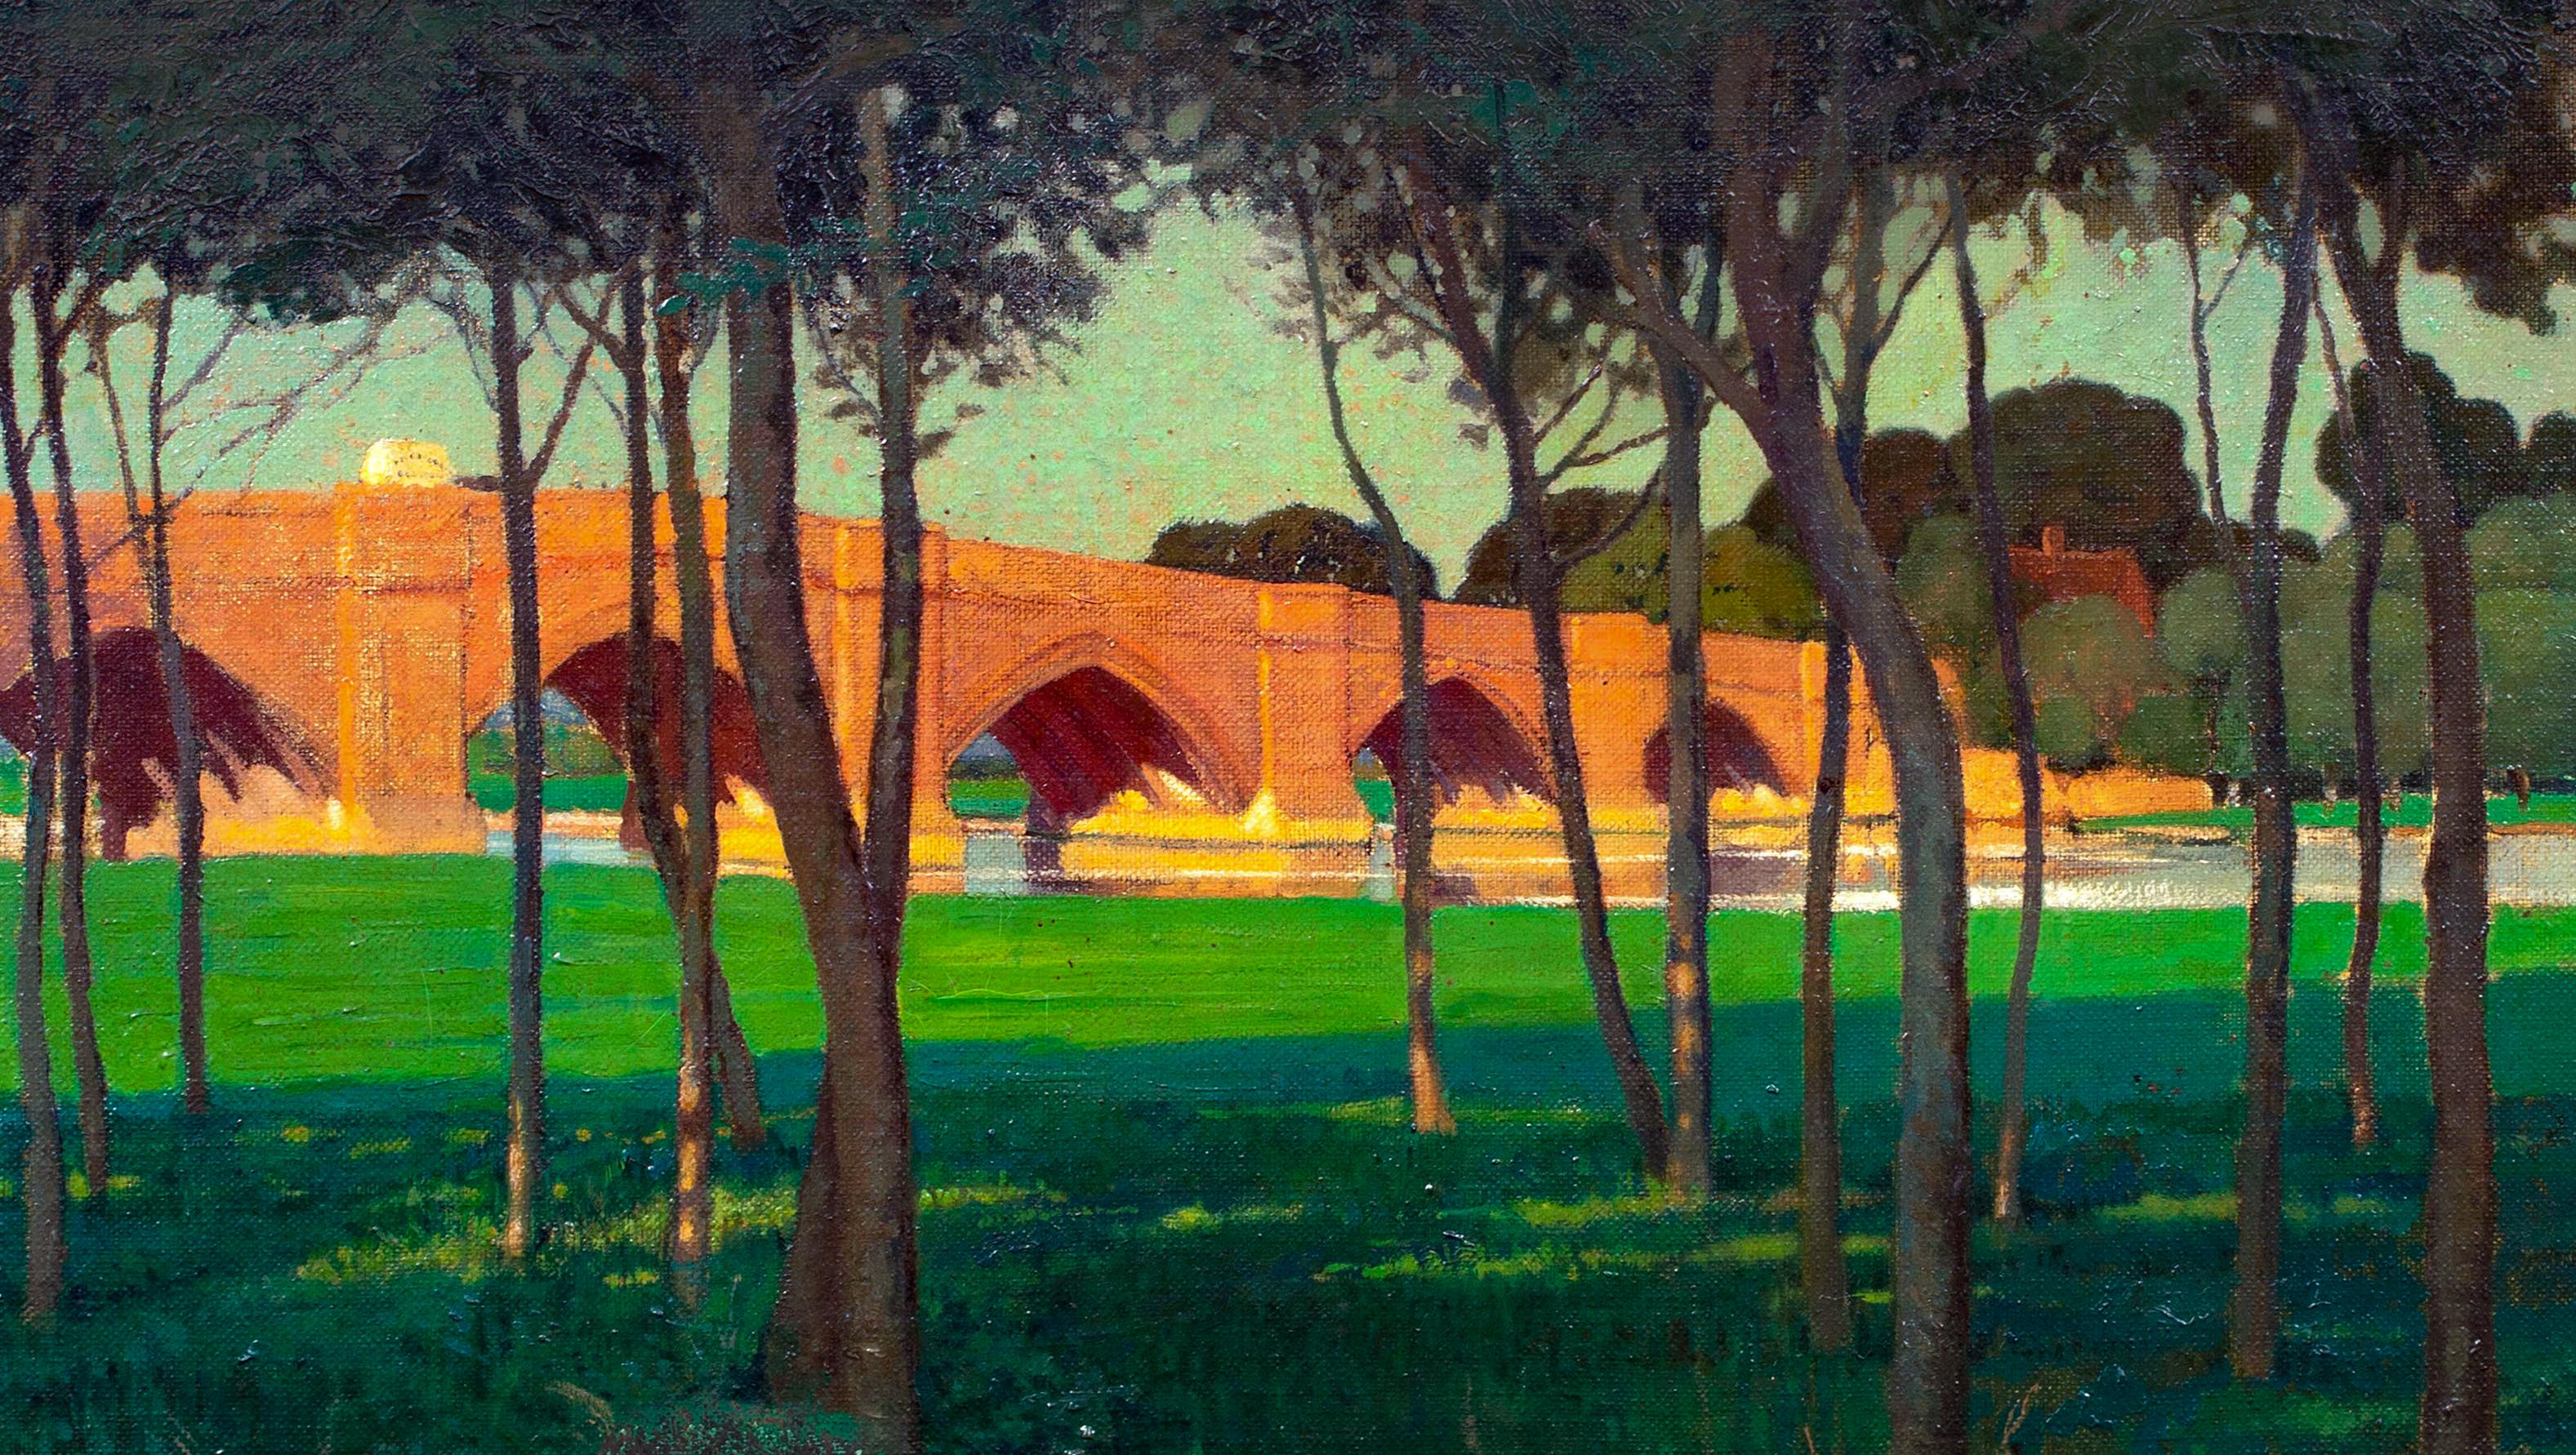 Clifton Hampden Bridge, early 20th Century

by EVELYN FOTHERGILL ROBINSON (1872-1939)

Large Early 20th Century view of Clifton Hampden Bridge in summer seen through a glade of trees, oil on canvas by Evelyn Fothergill Robinson. Excellent quality